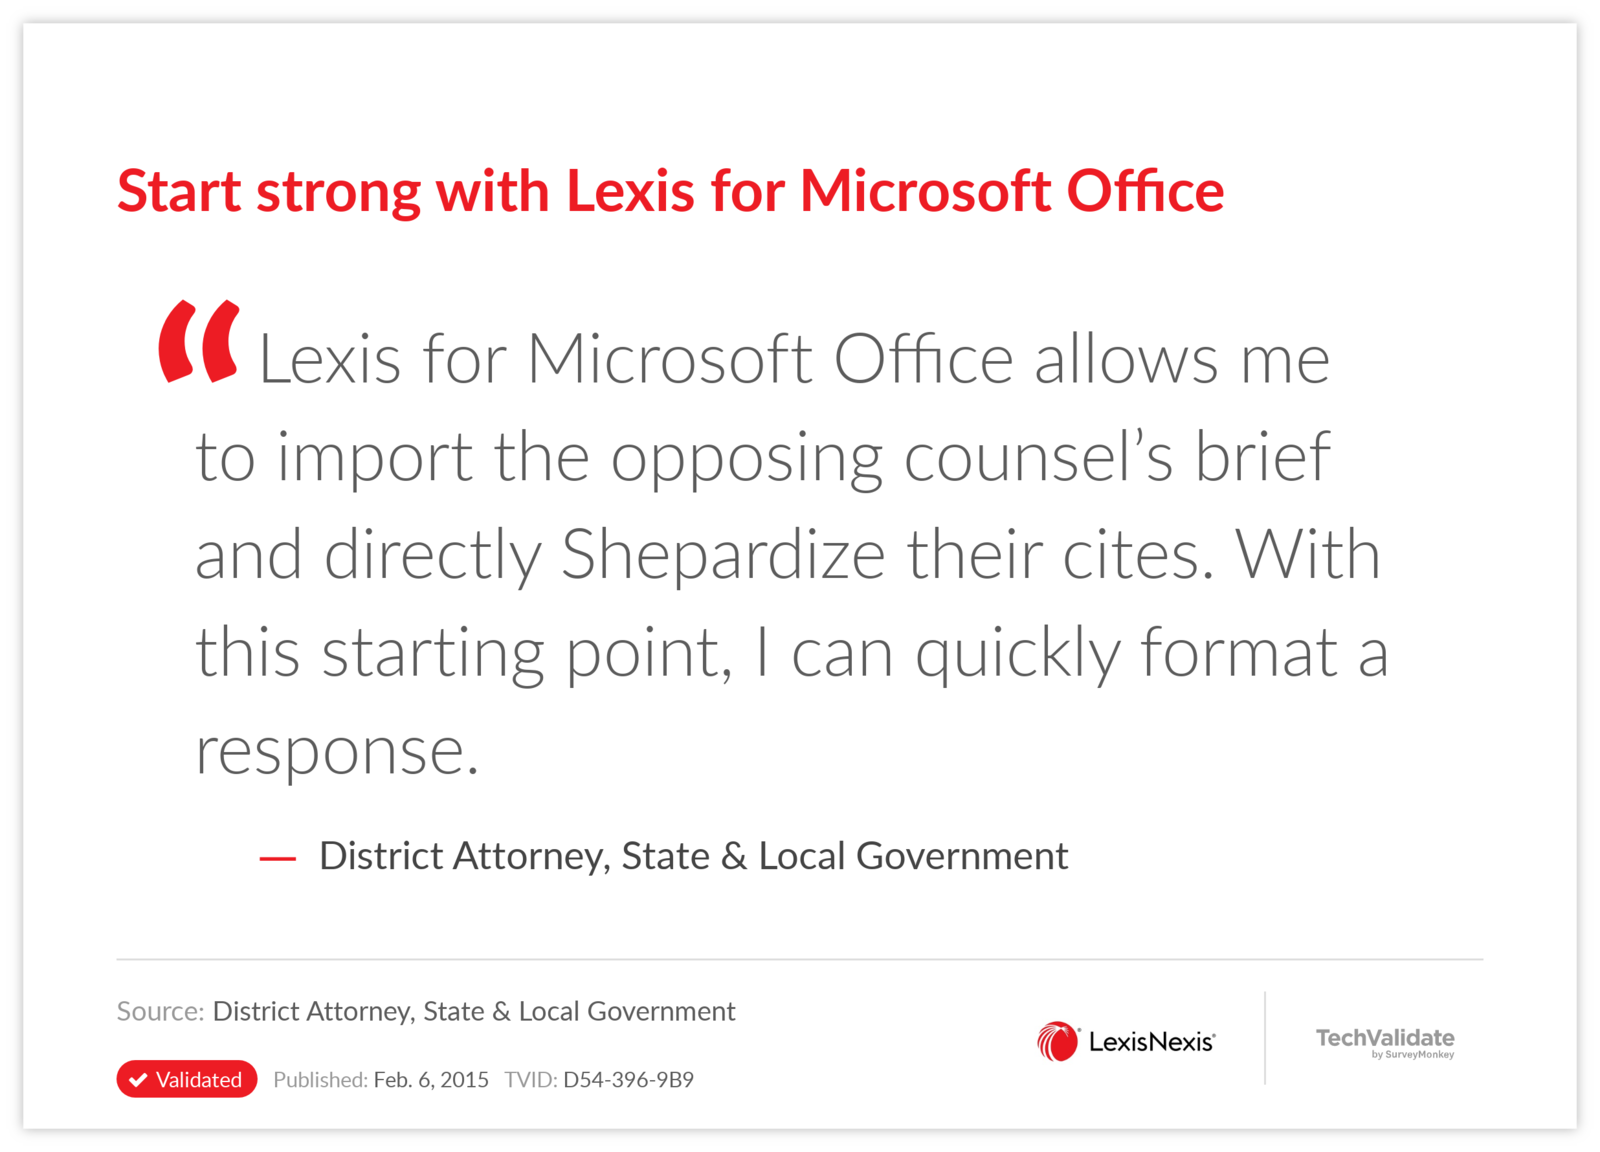 Start strong with Lexis for Microsoft Office